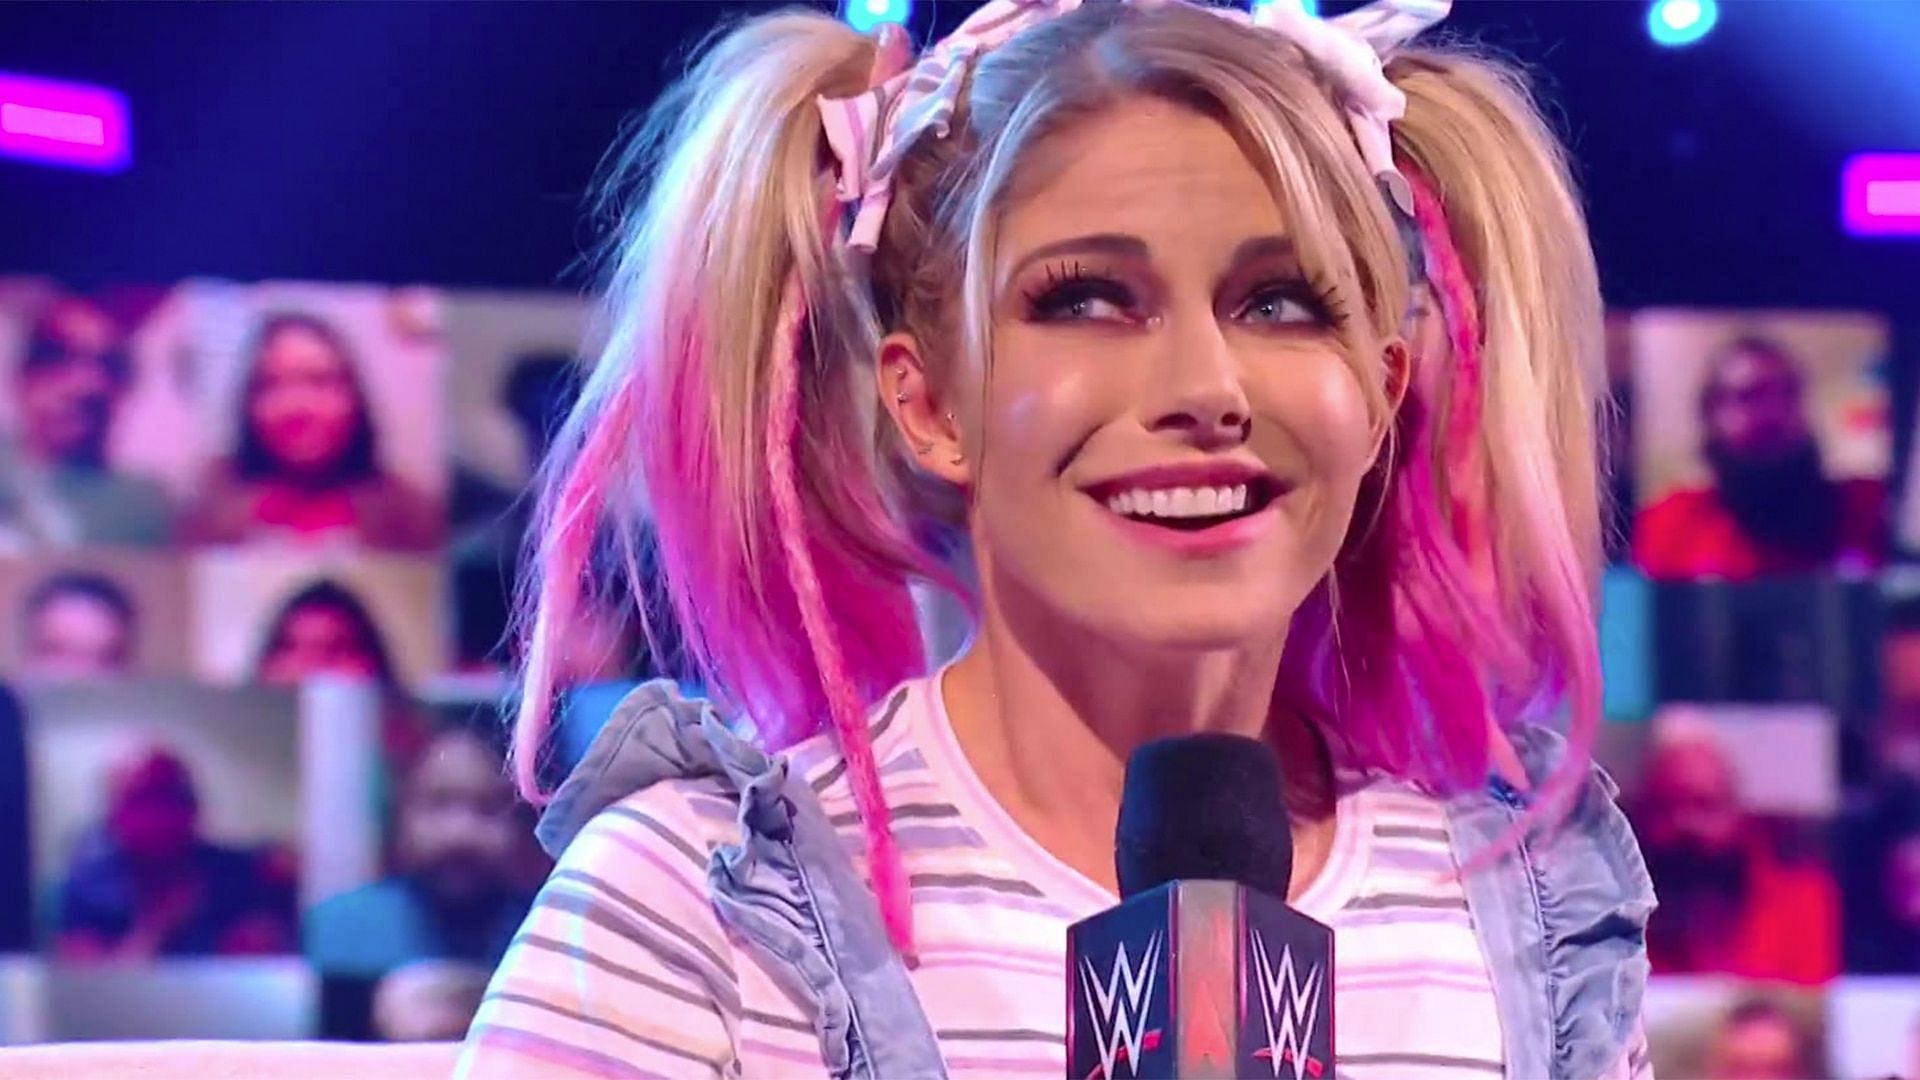 Alexa Bliss has been a multi-time WWE champion.